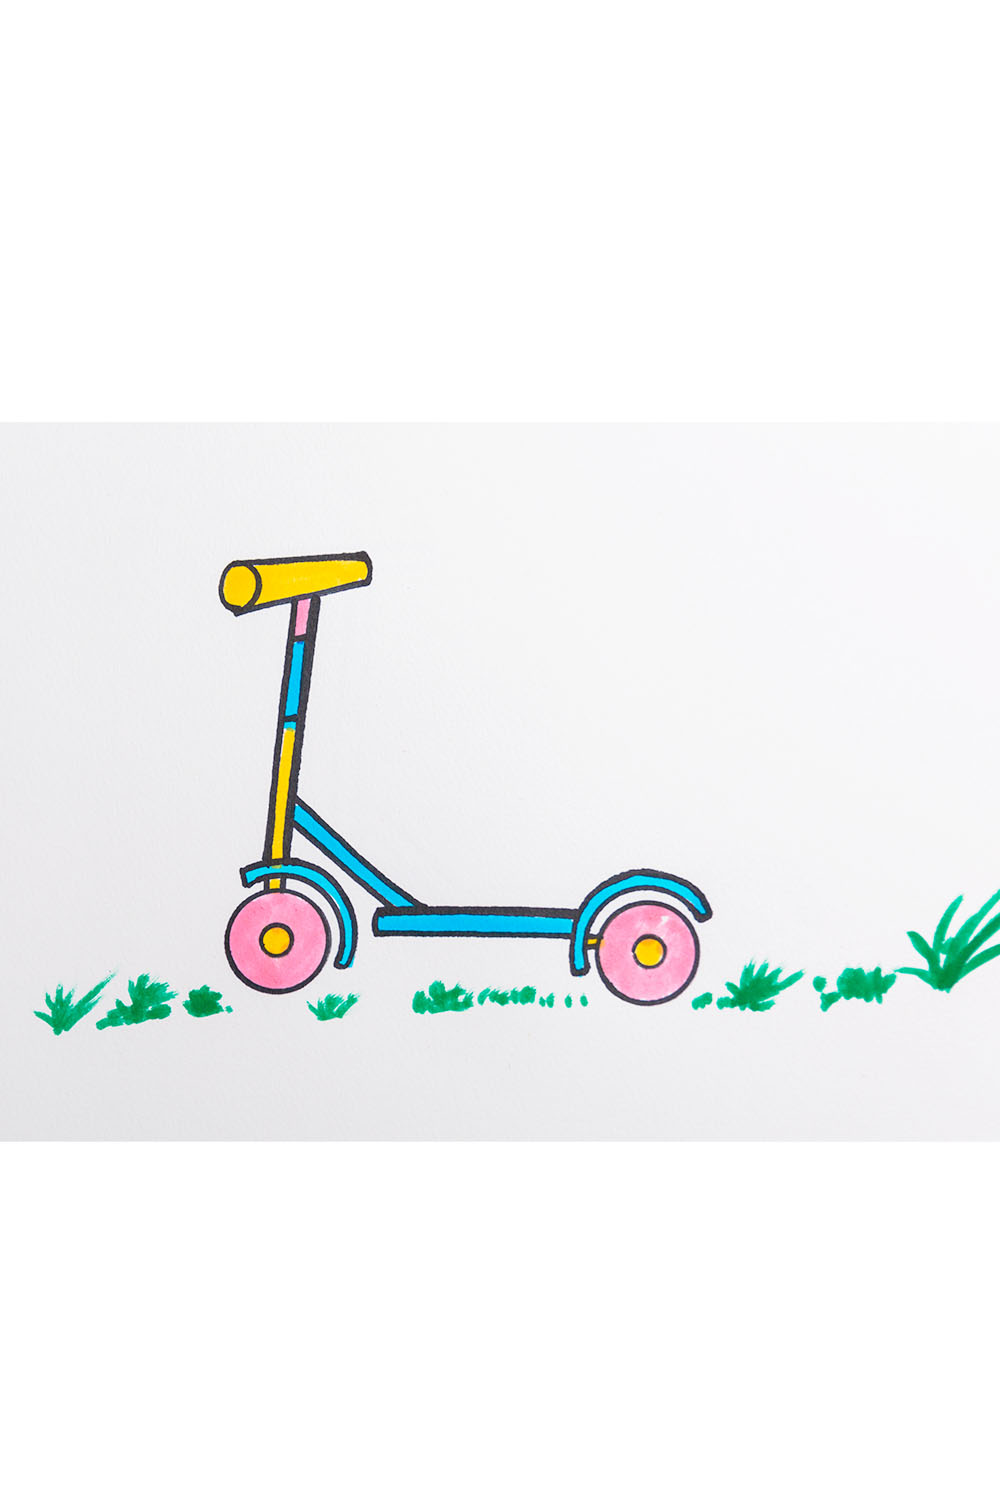 How to draw scooter